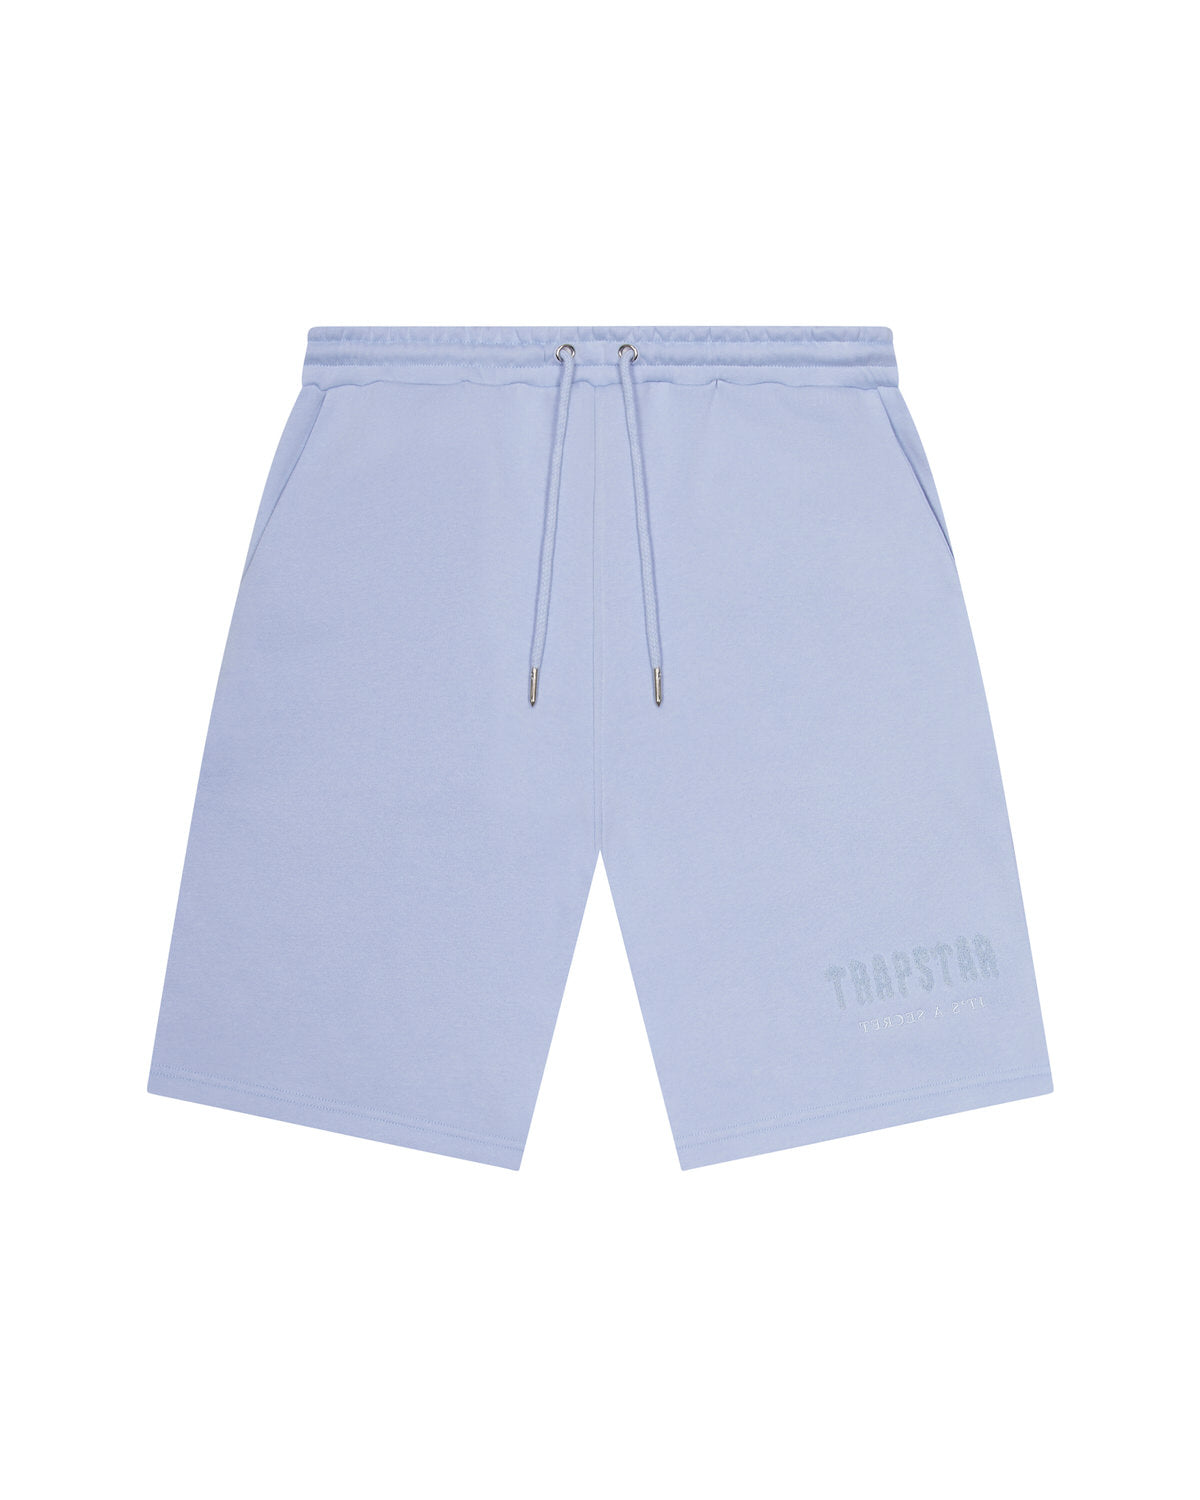 Decoded Chenille Shorts - Ice Blue